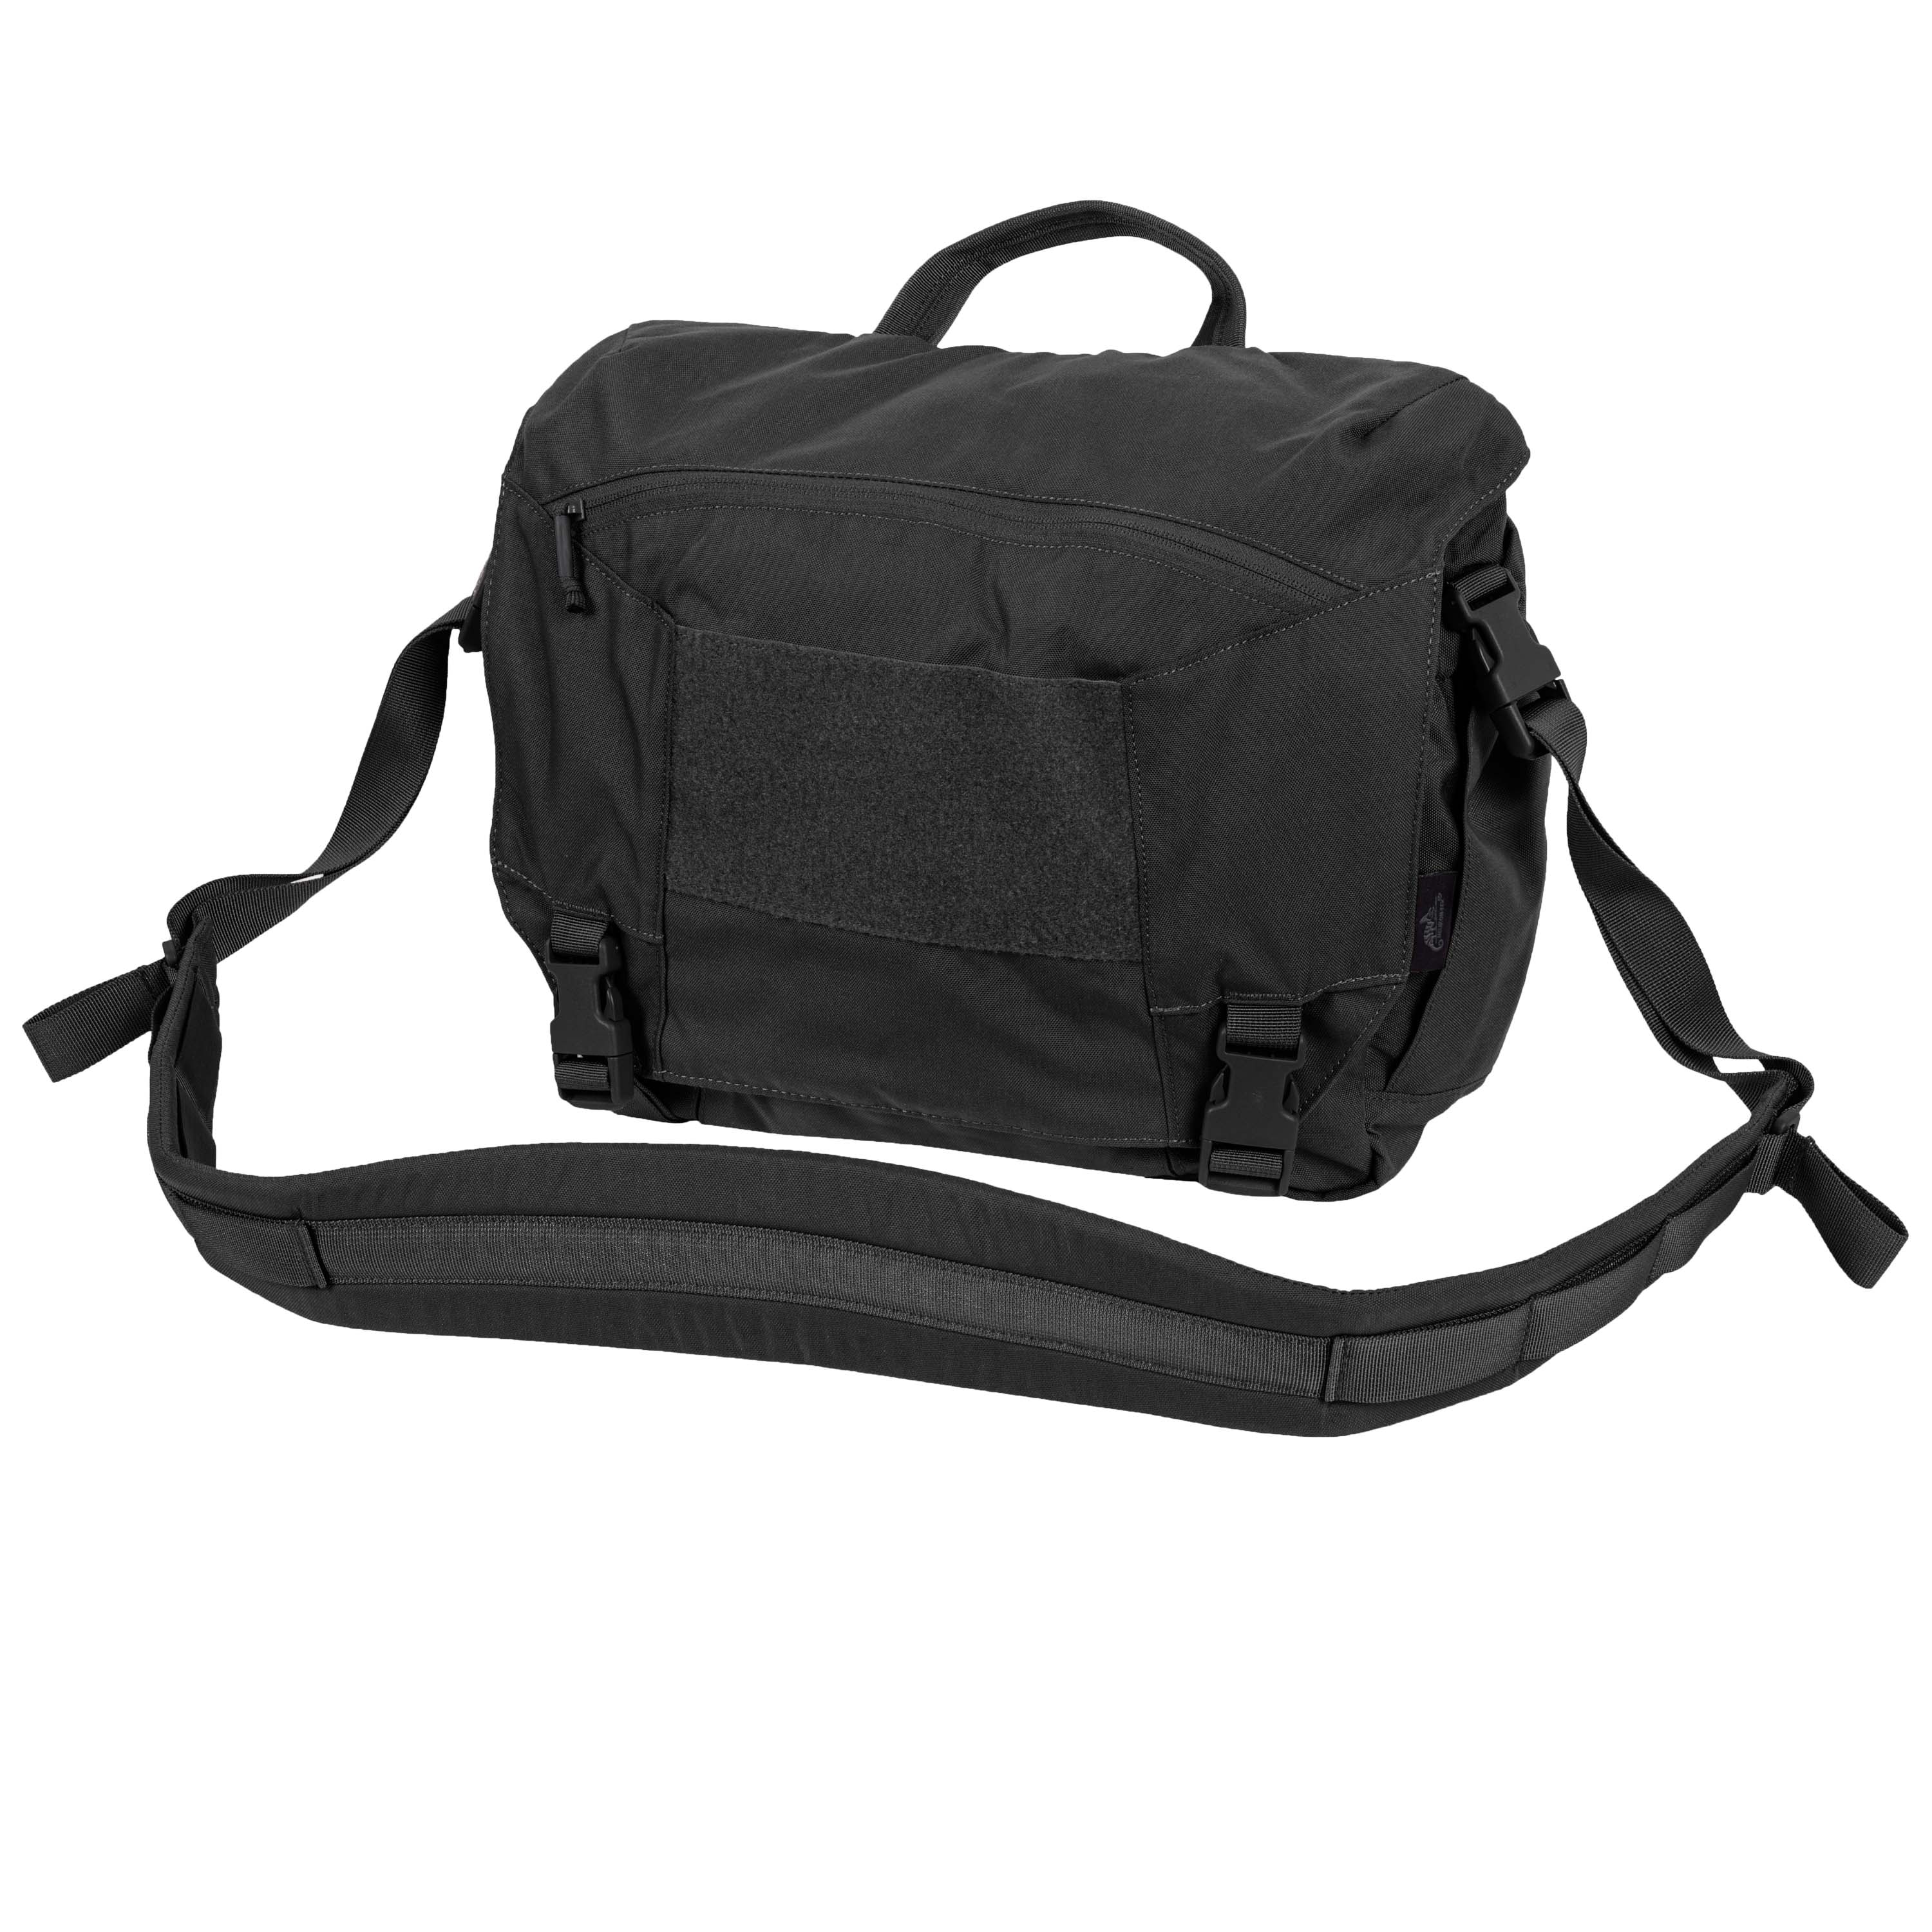 Helikon-Tex Urban Courier Bag Medium CCW Hunting Airsoft Durable Security Black 